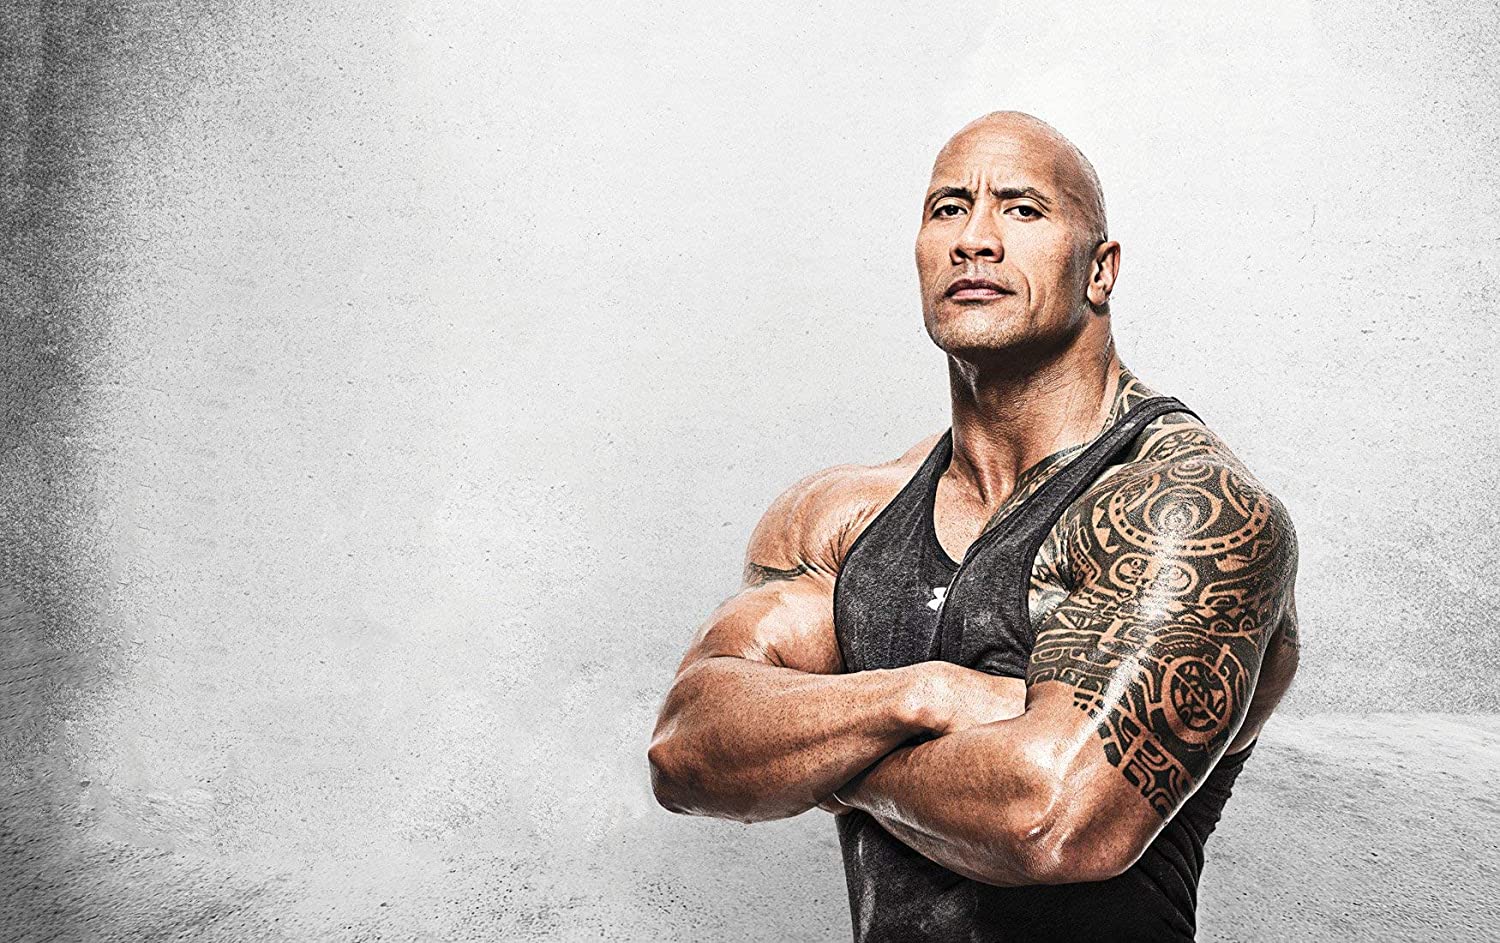 Dwayne Johnson Upcoming Movies 2020, 2021 & 2022 Release Date & New